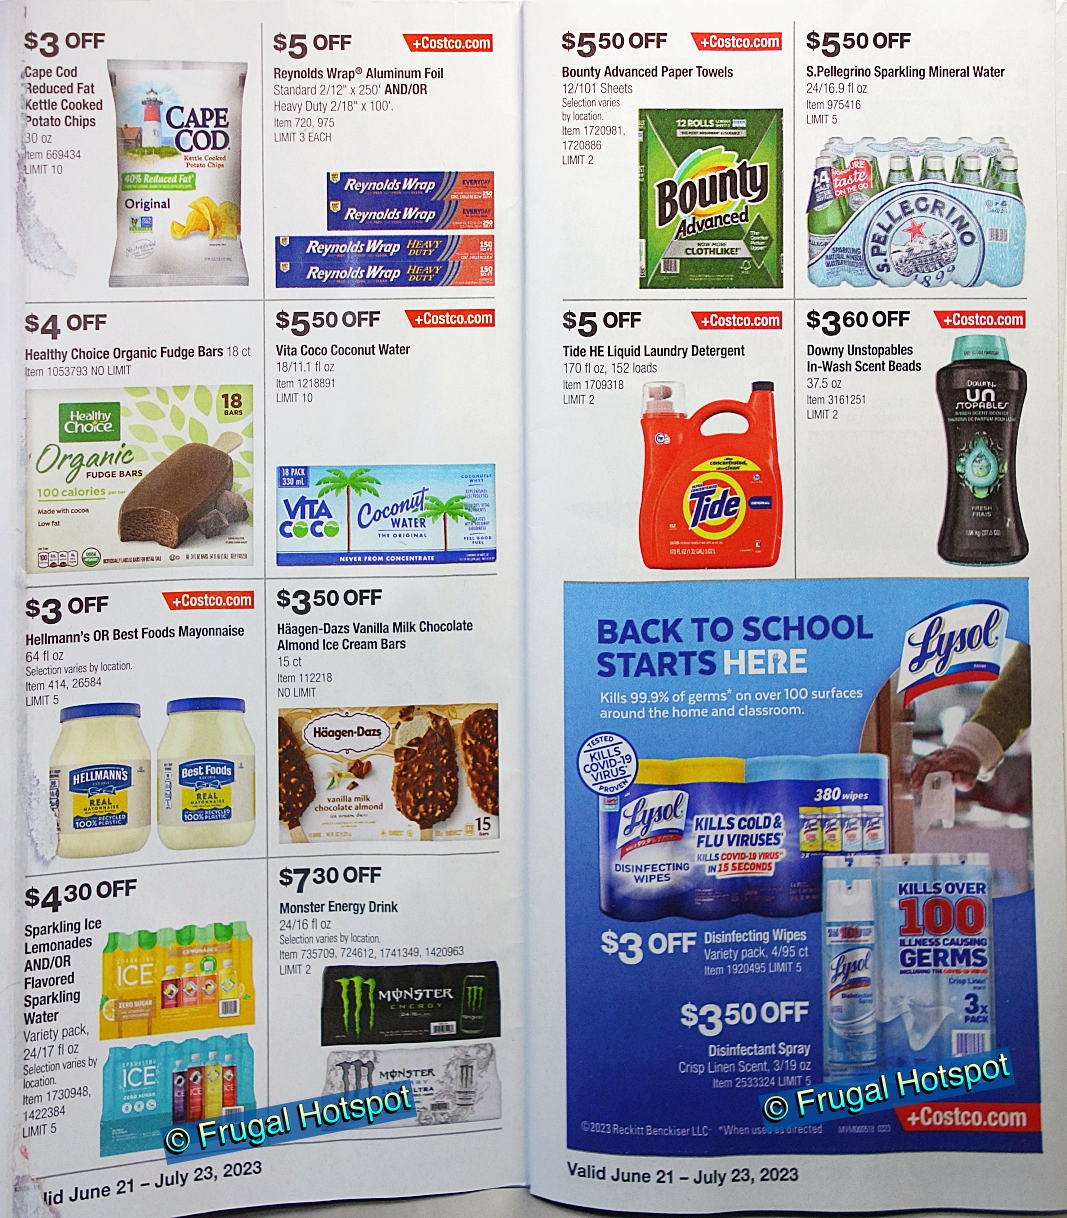 Costco Coupon Book JUNE JULY 2023 | P 2 and 3